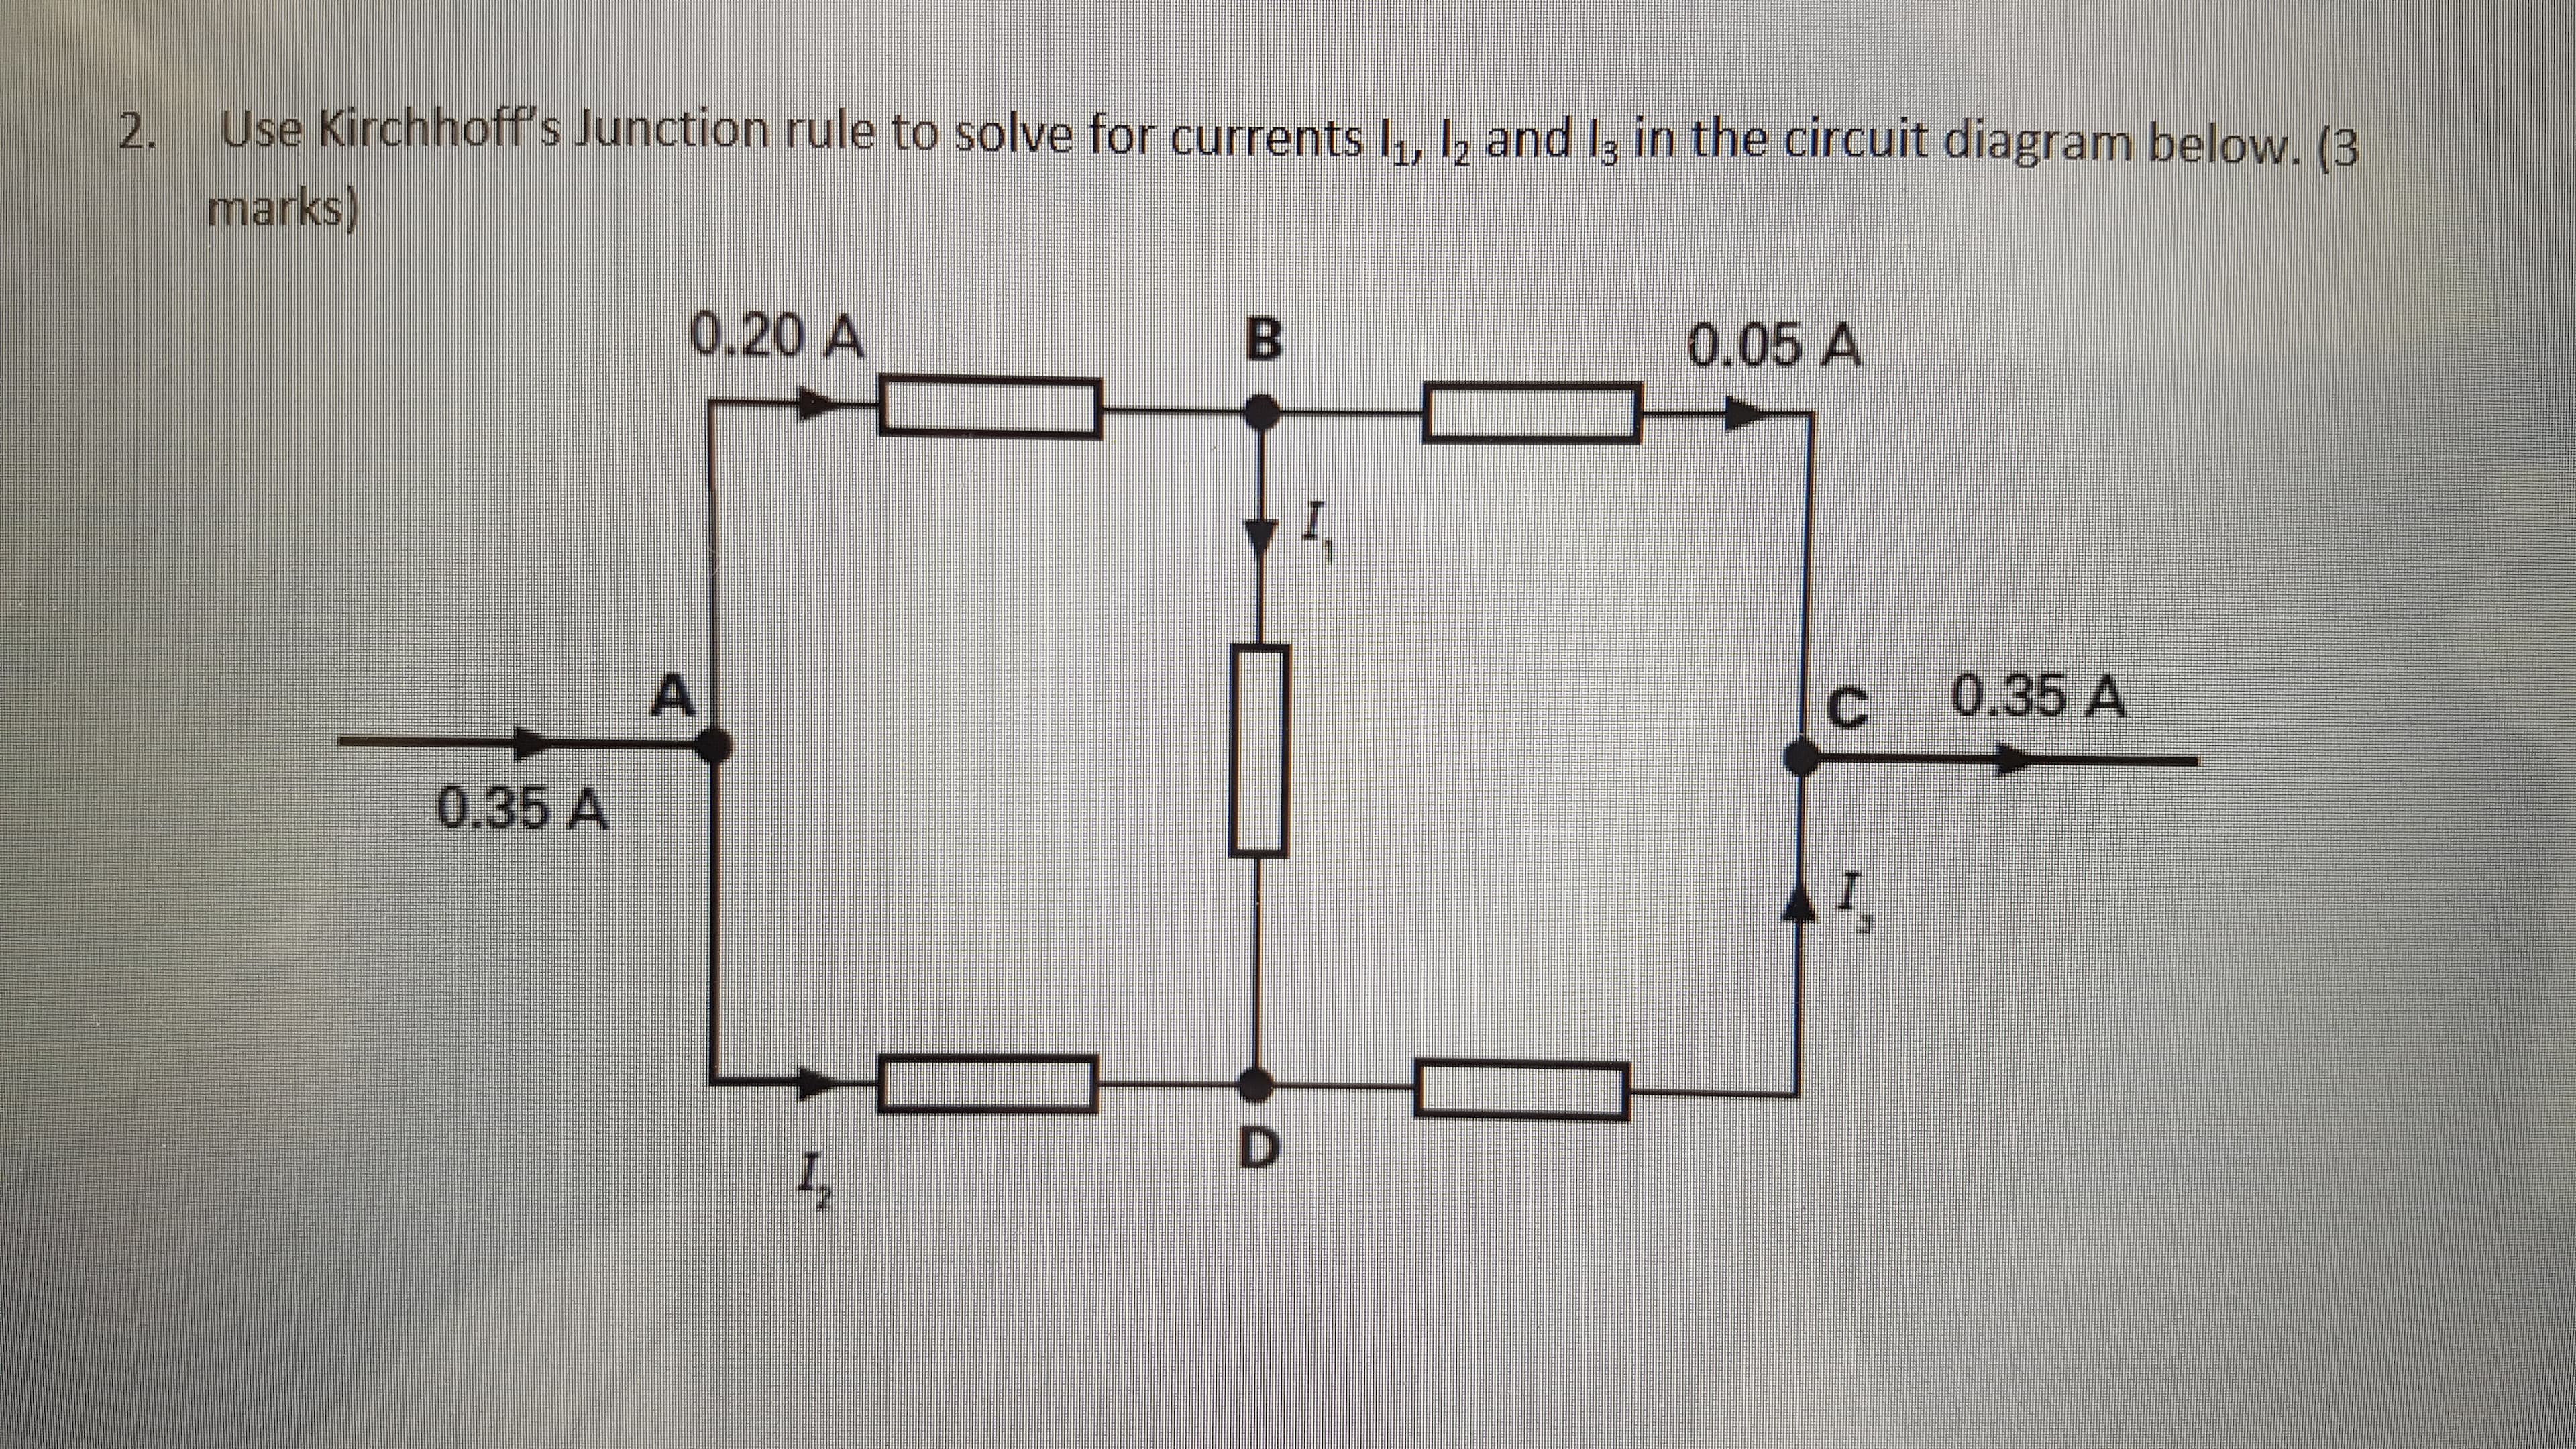 Use Kirchhoff's Junction rule to solve for currents I, I, and I3 in the circuit diagram below. (3
